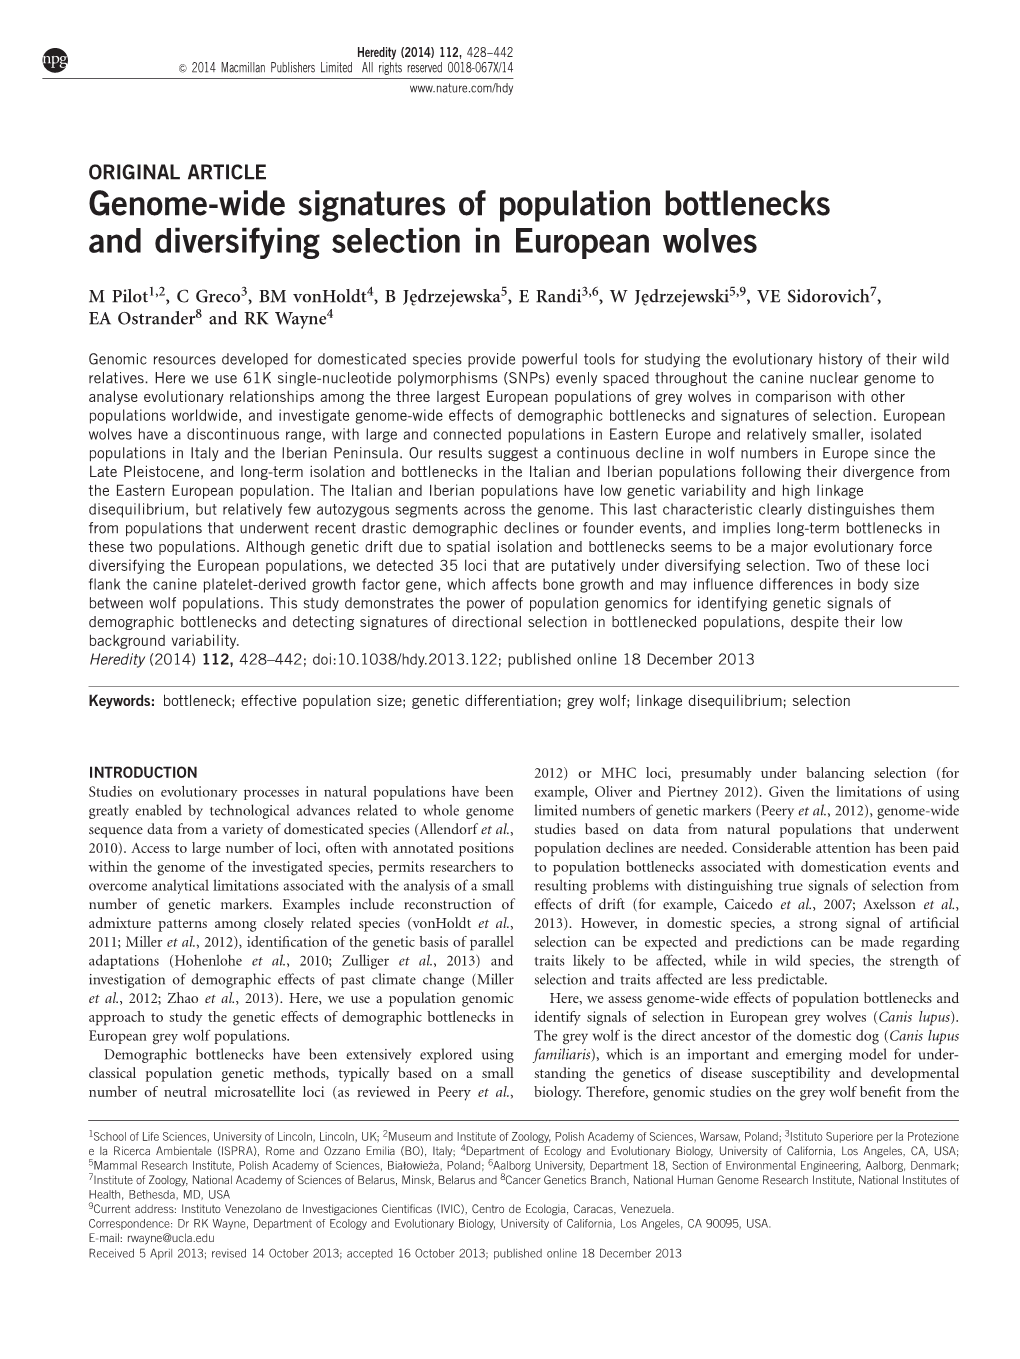 Genome-Wide Signatures of Population Bottlenecks and Diversifying Selection in European Wolves